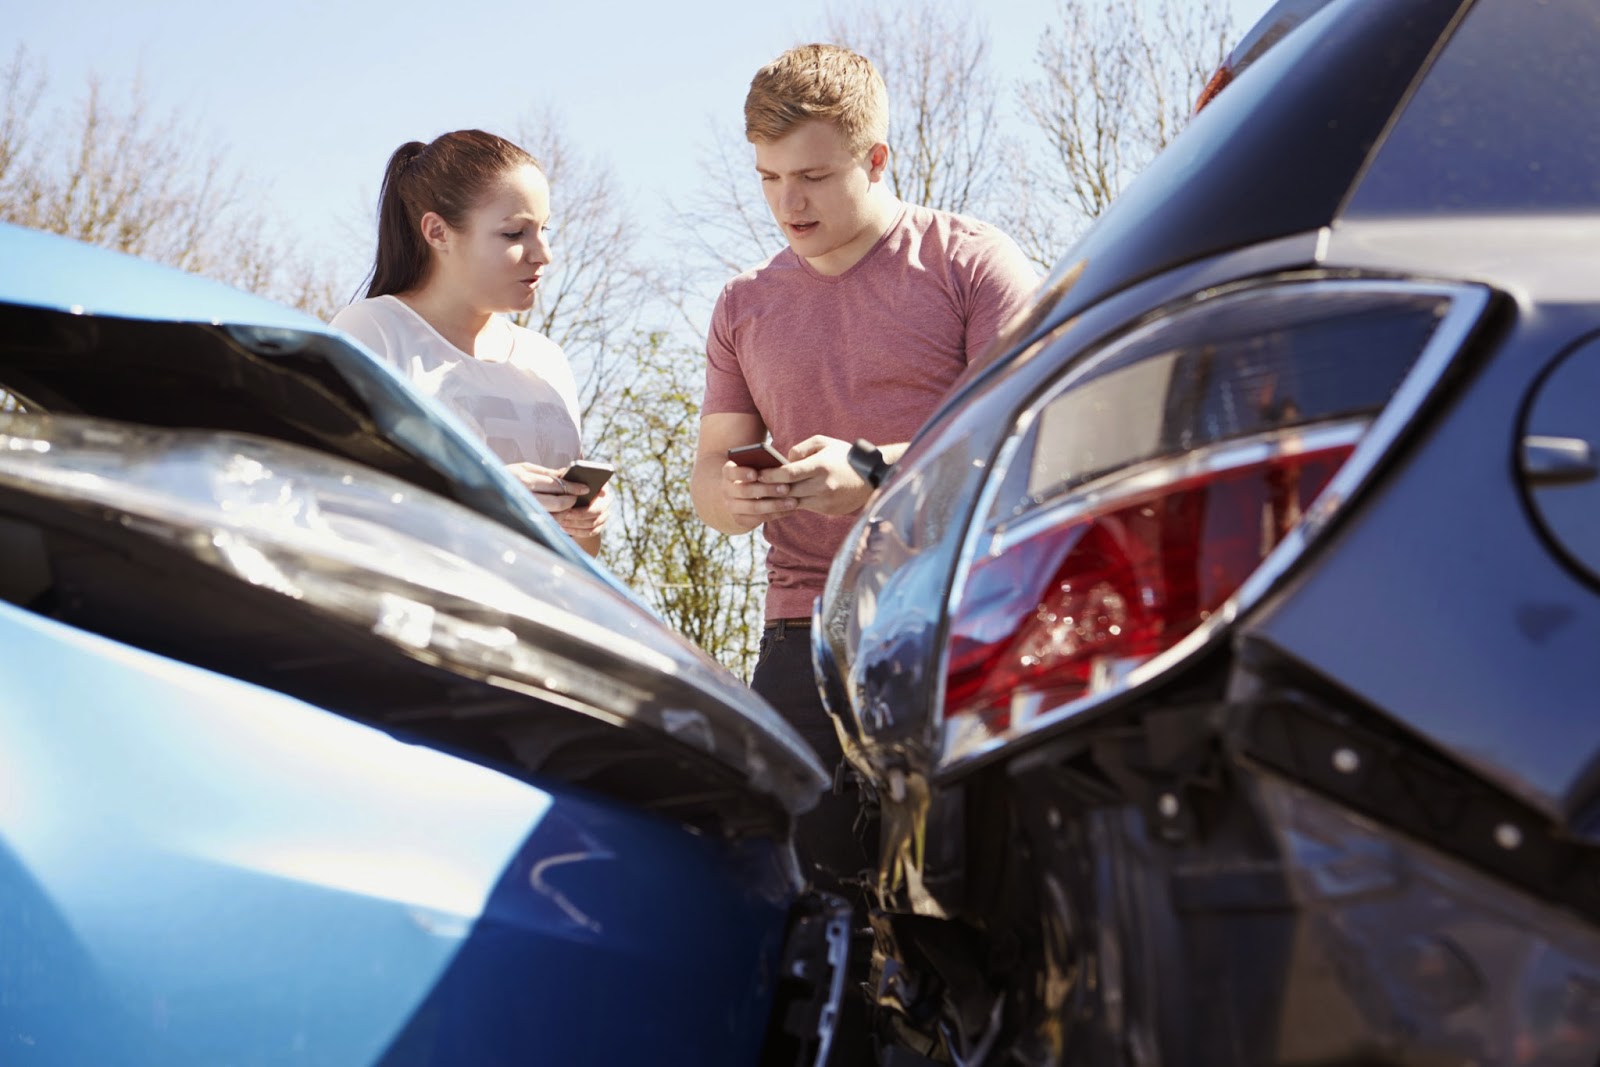 Scott J. Sternberg and Associates, P.A.: Who Do I Call After An Accident?